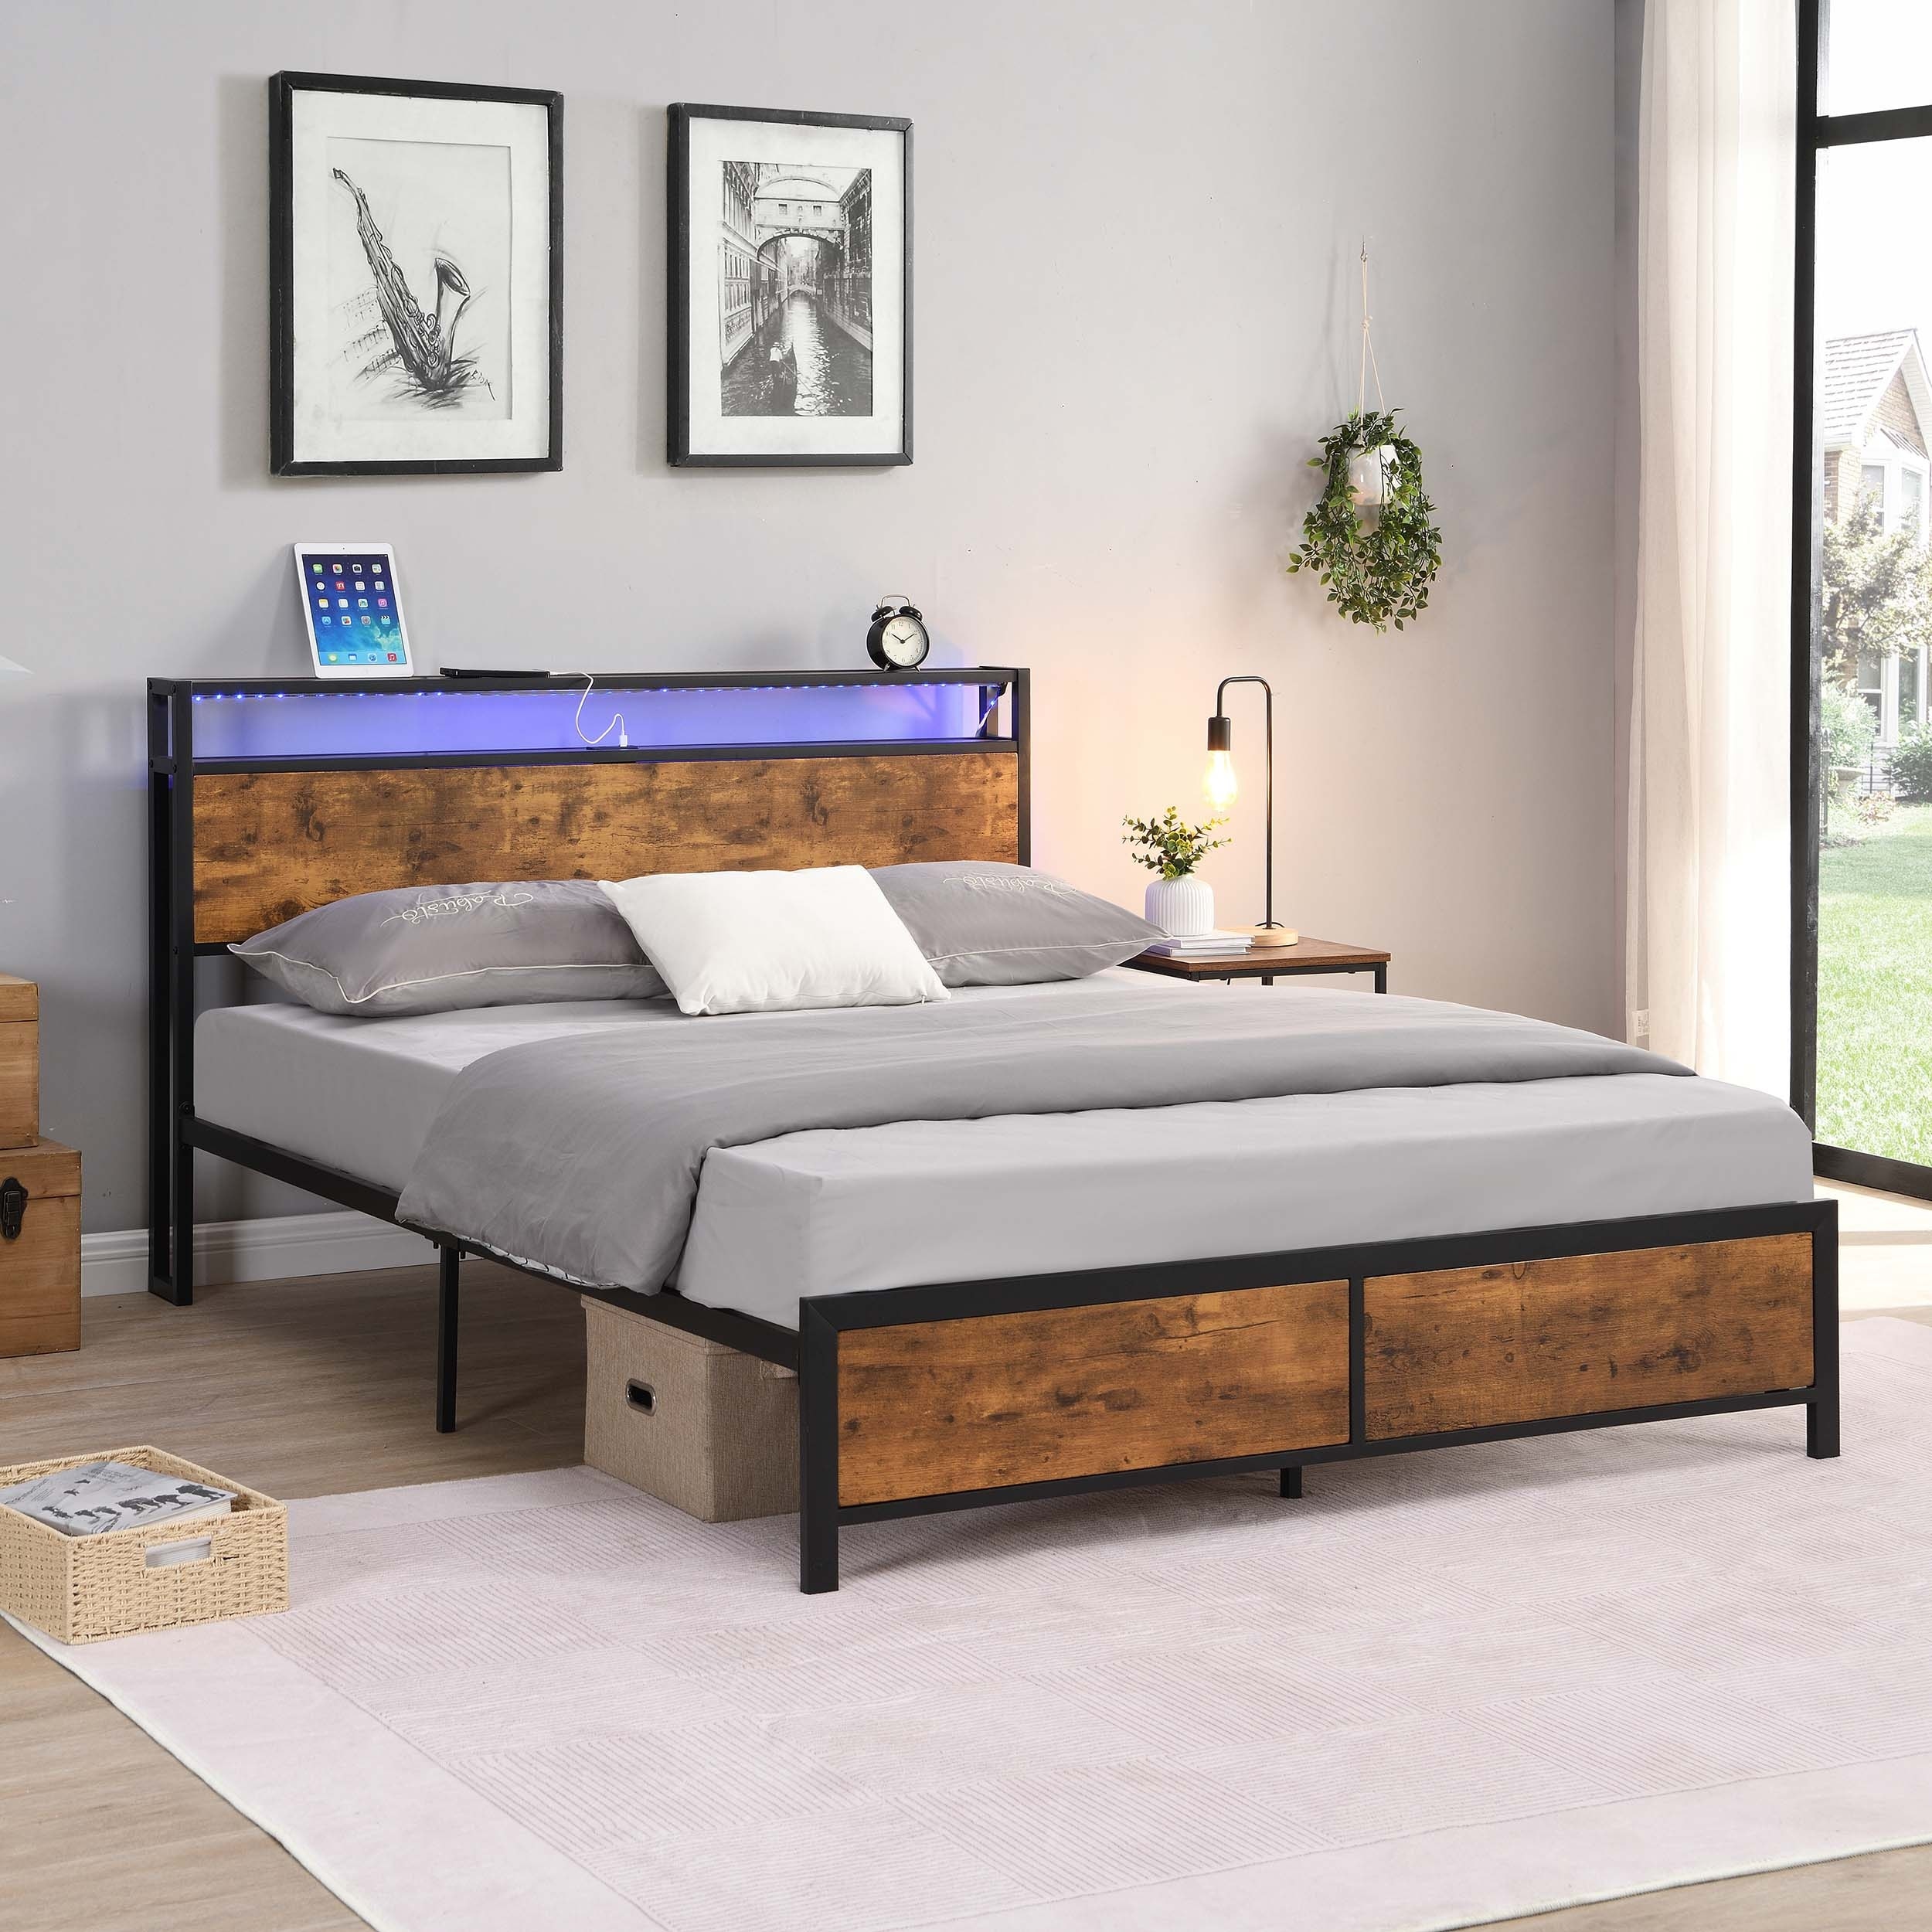 Versatile Queen/full Size Upholstered Platform Bed With Storage Options